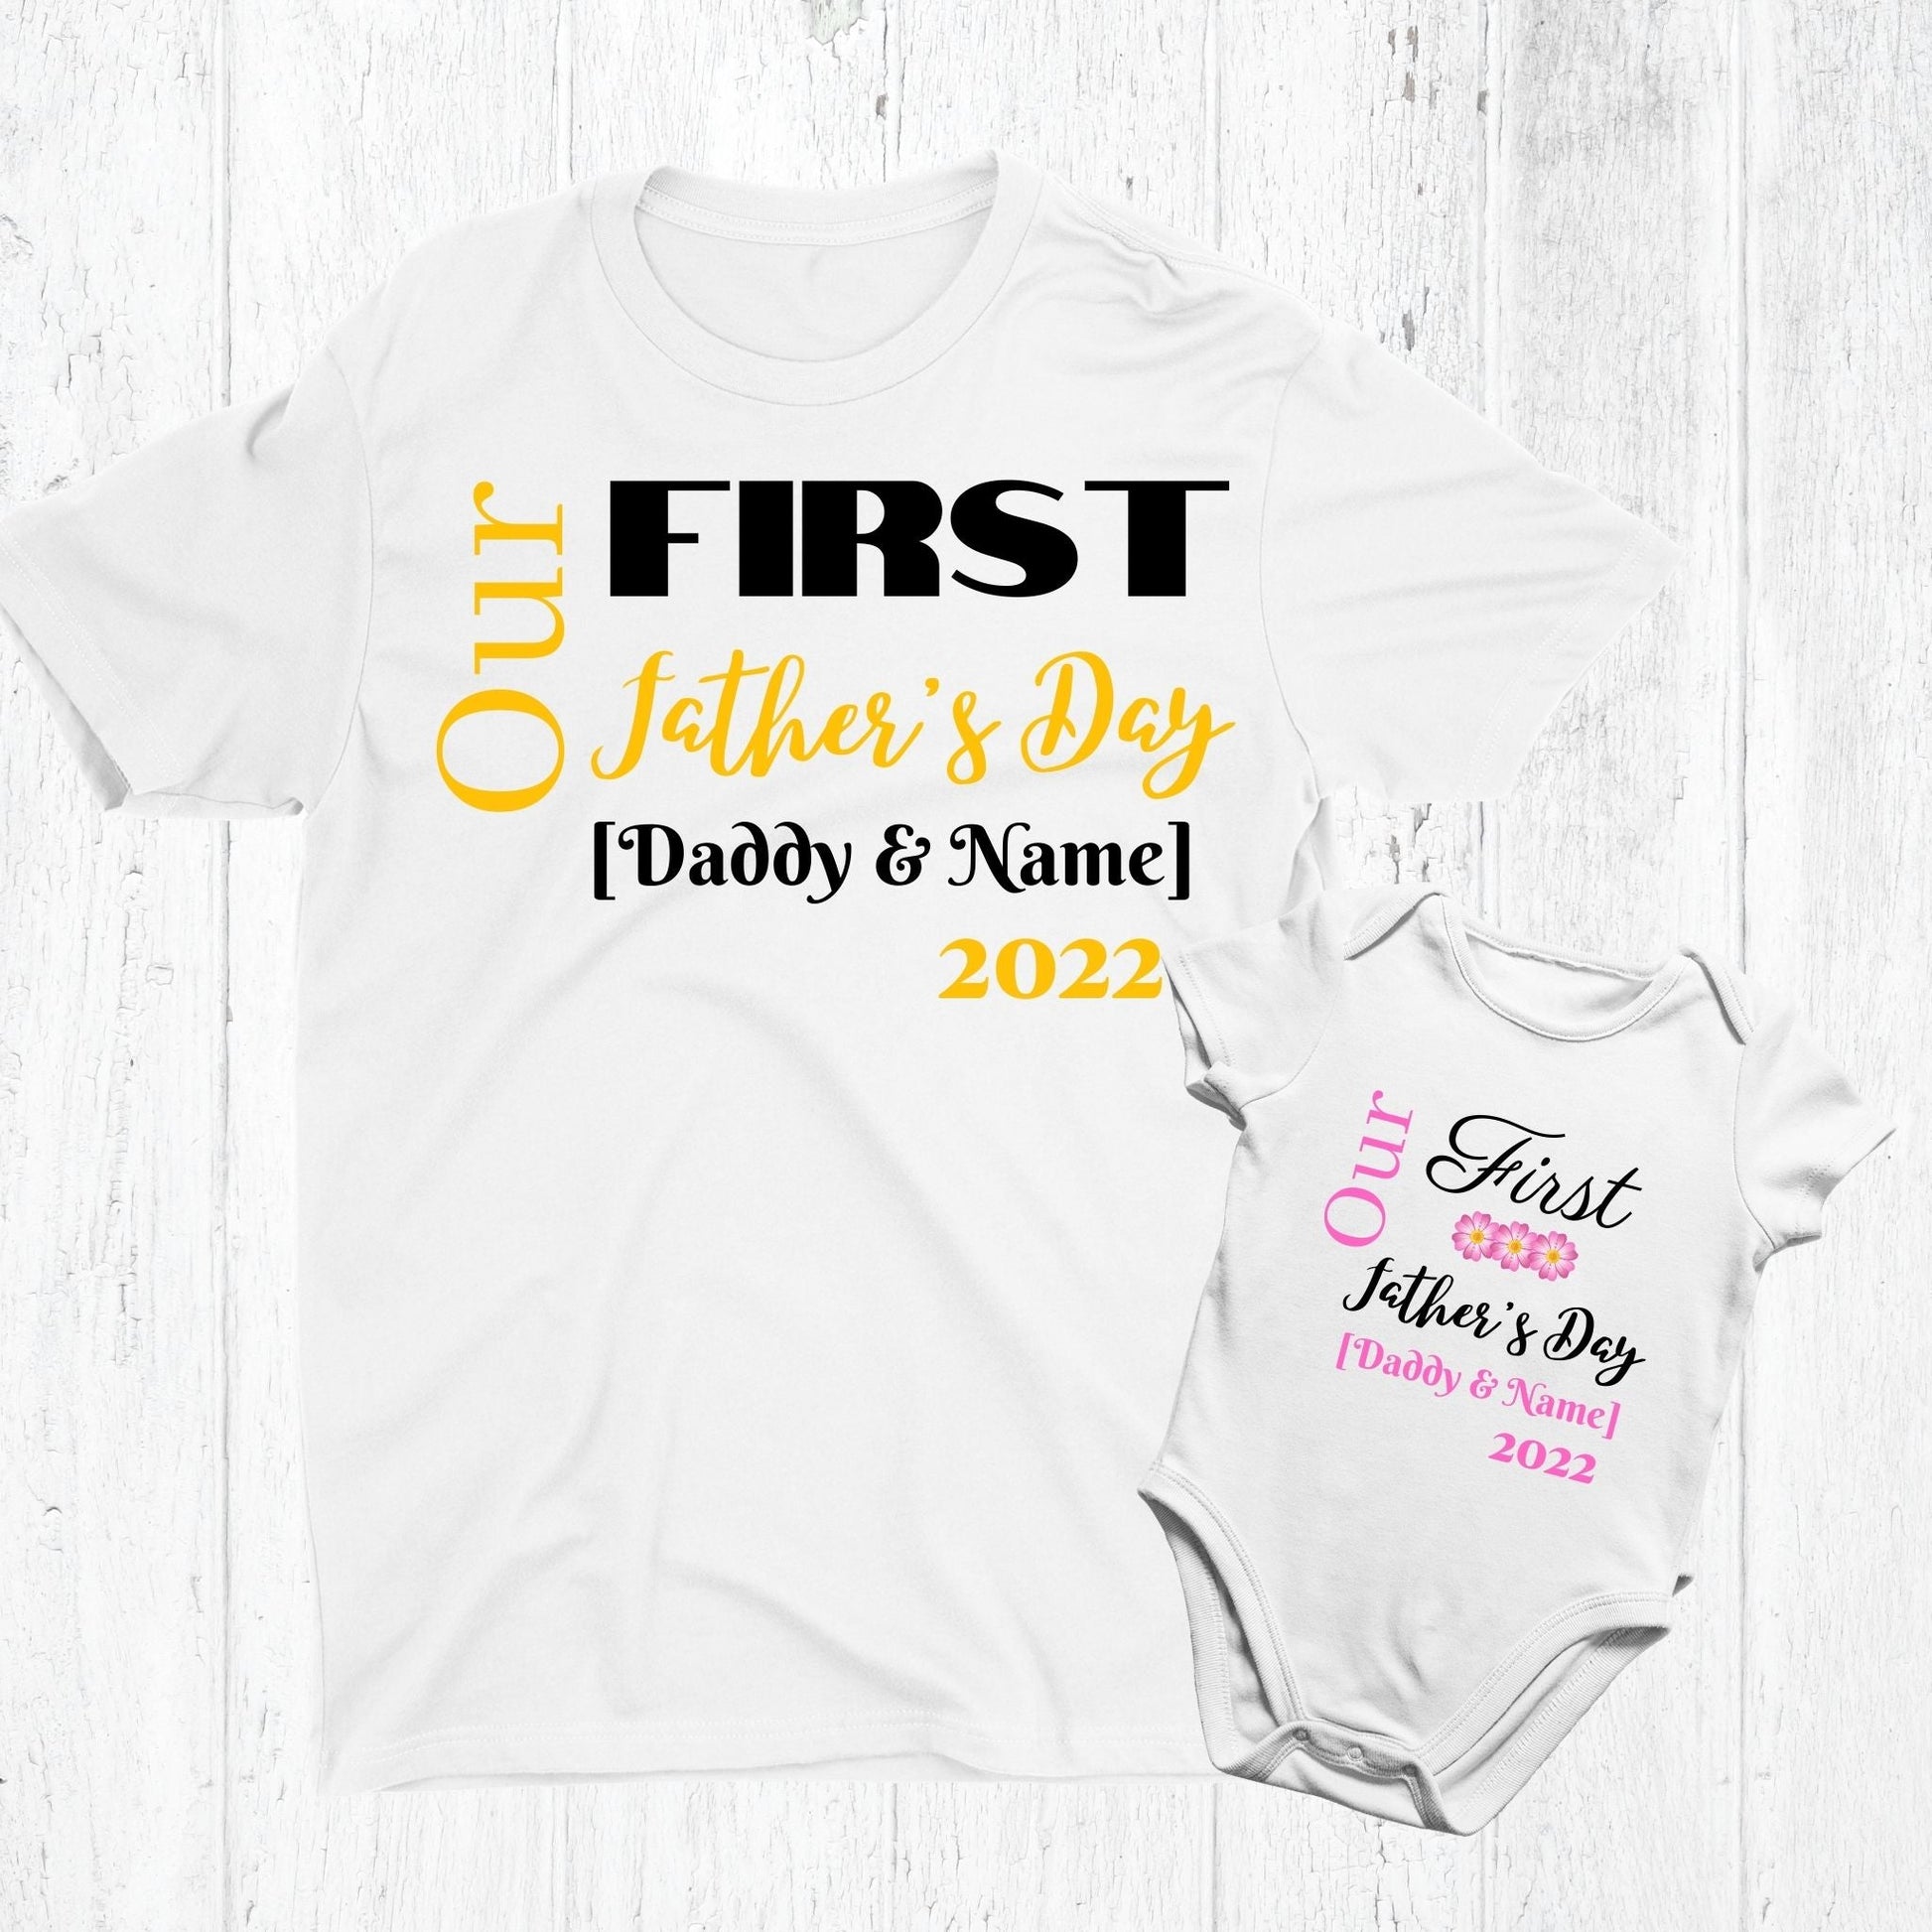 My First Fathers Day | Custom Matching Dad and Baby Outfits - Three2Tango Tee's